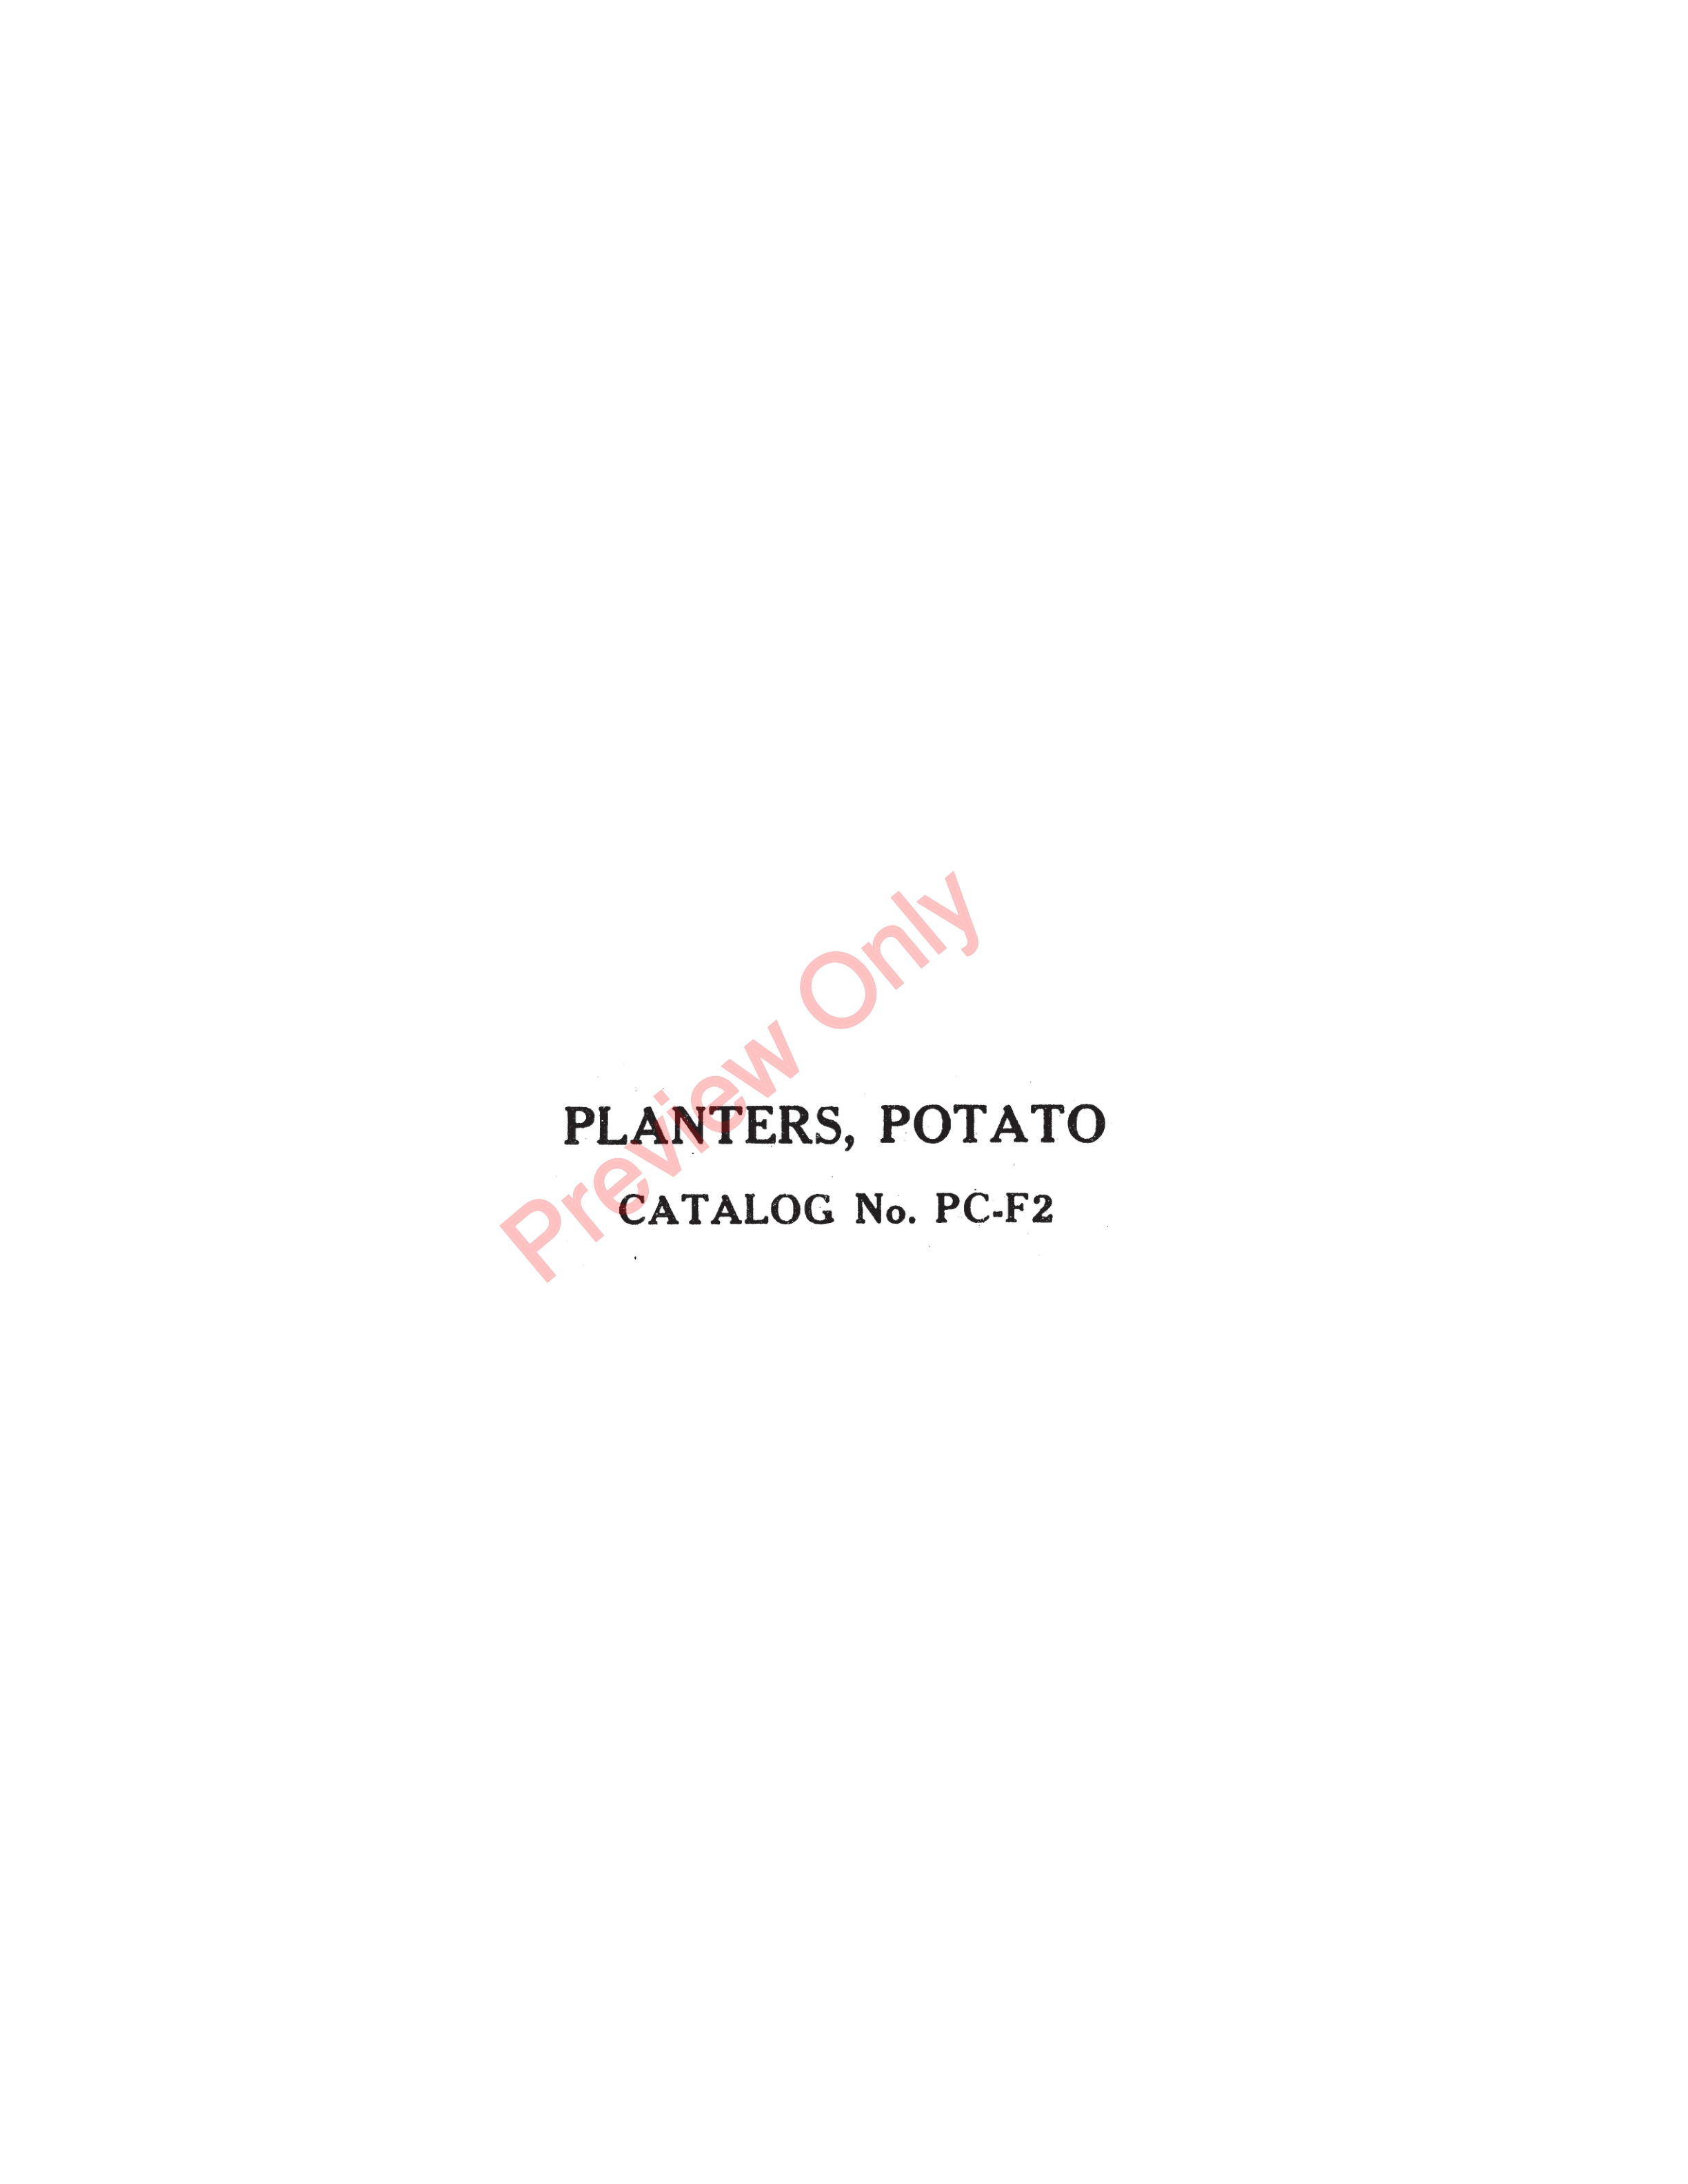 John Deere One and Two-Row Potato Pickers Hoover Series, 1400 and 12 Series Parts Catalog PCF2 01APR49-5